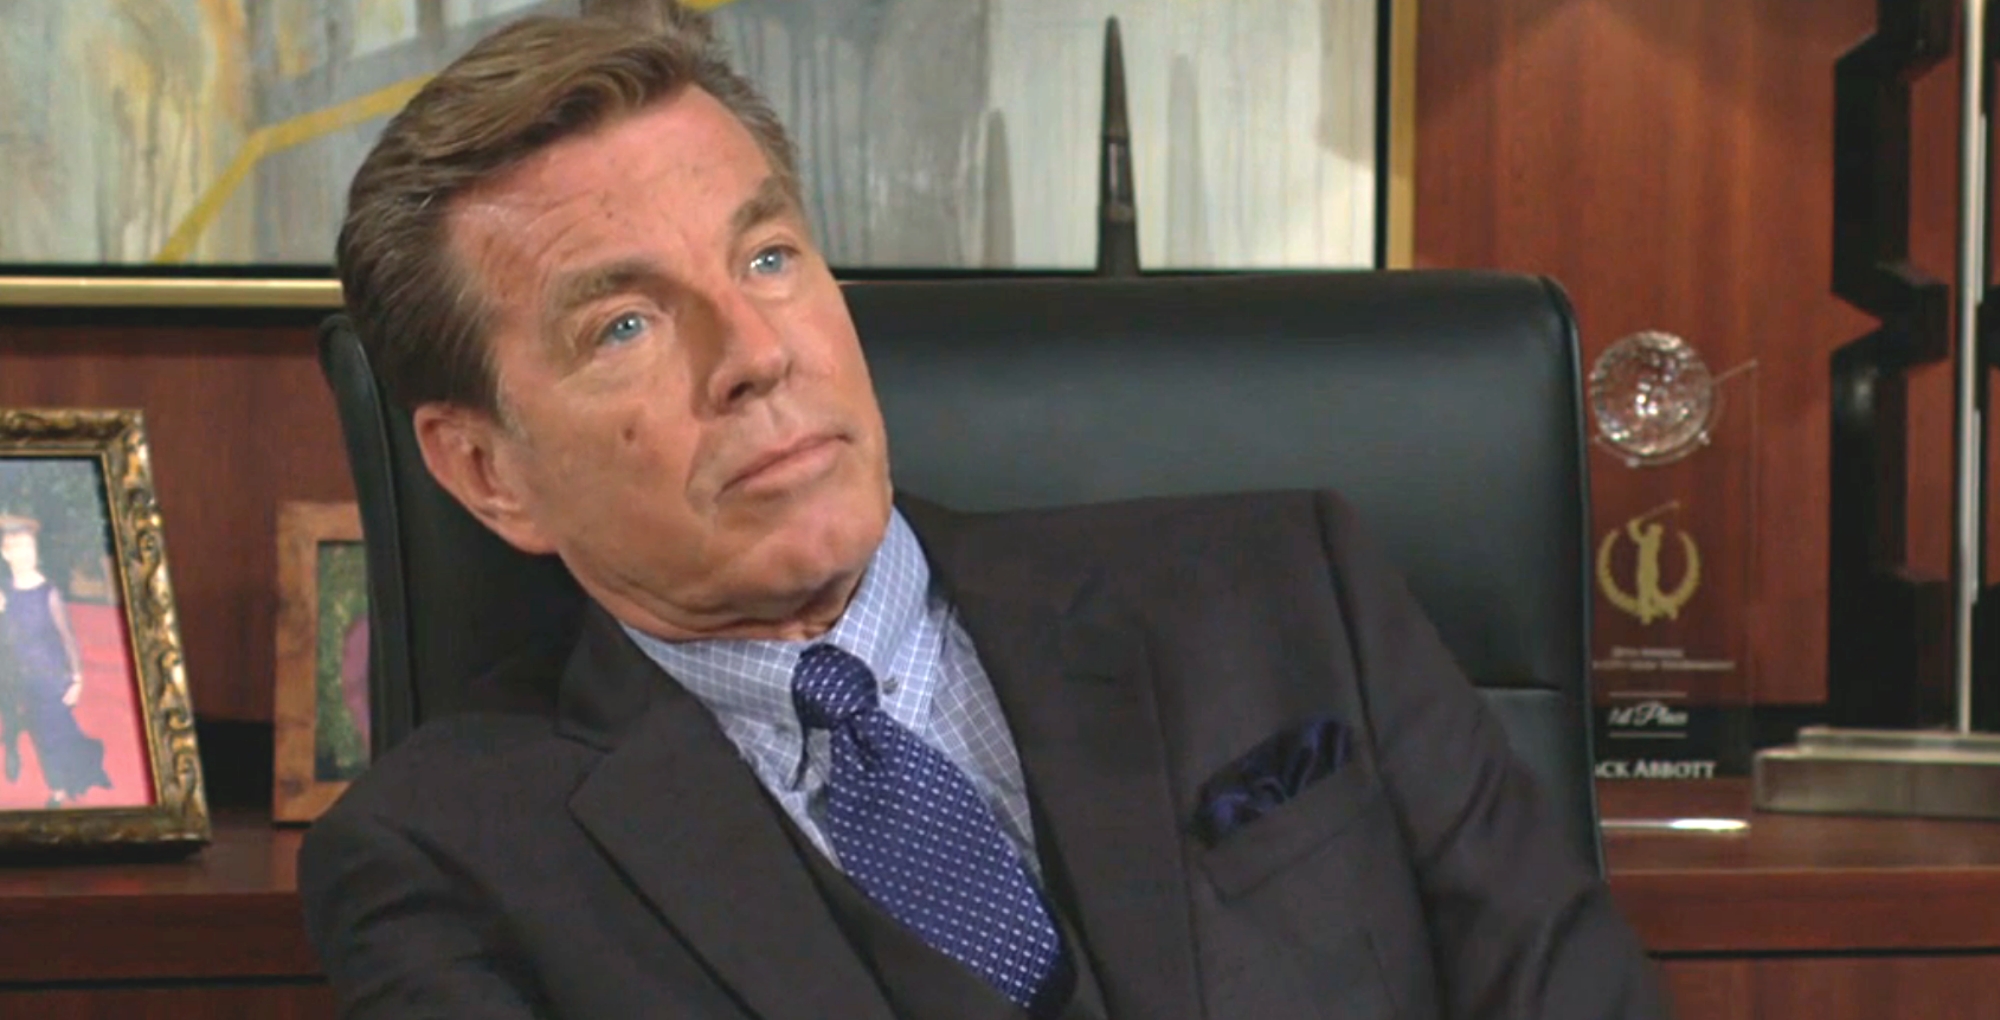 young and the restless spoilers for february 10, 2023 have jack abbott at jabot making a big move